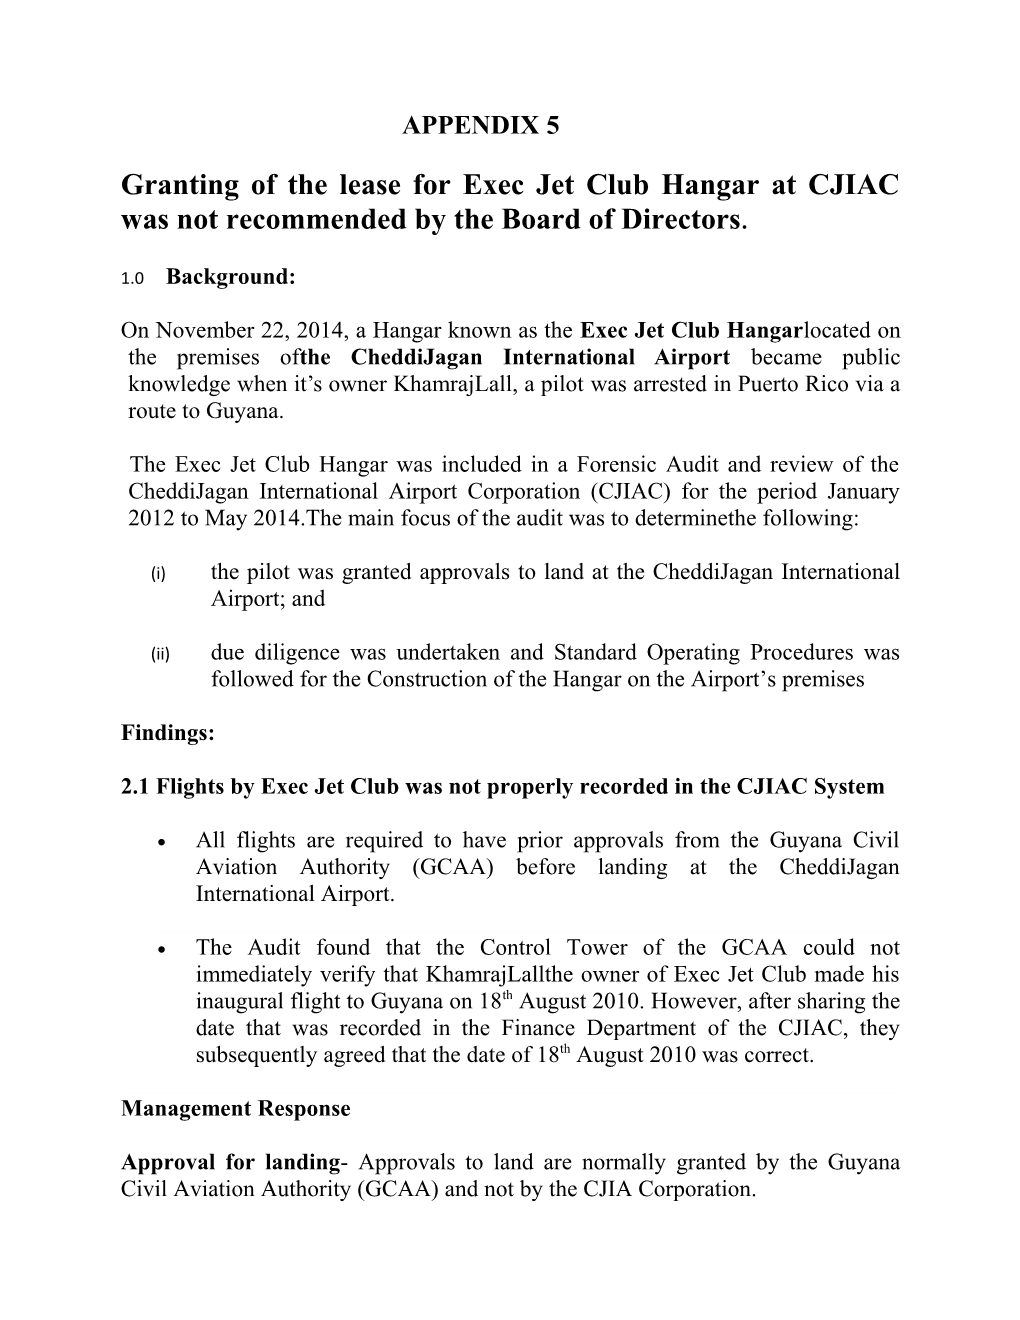 Granting of the Lease for Exec Jet Club Hangar at CJIAC Was Not Recommended by the Board